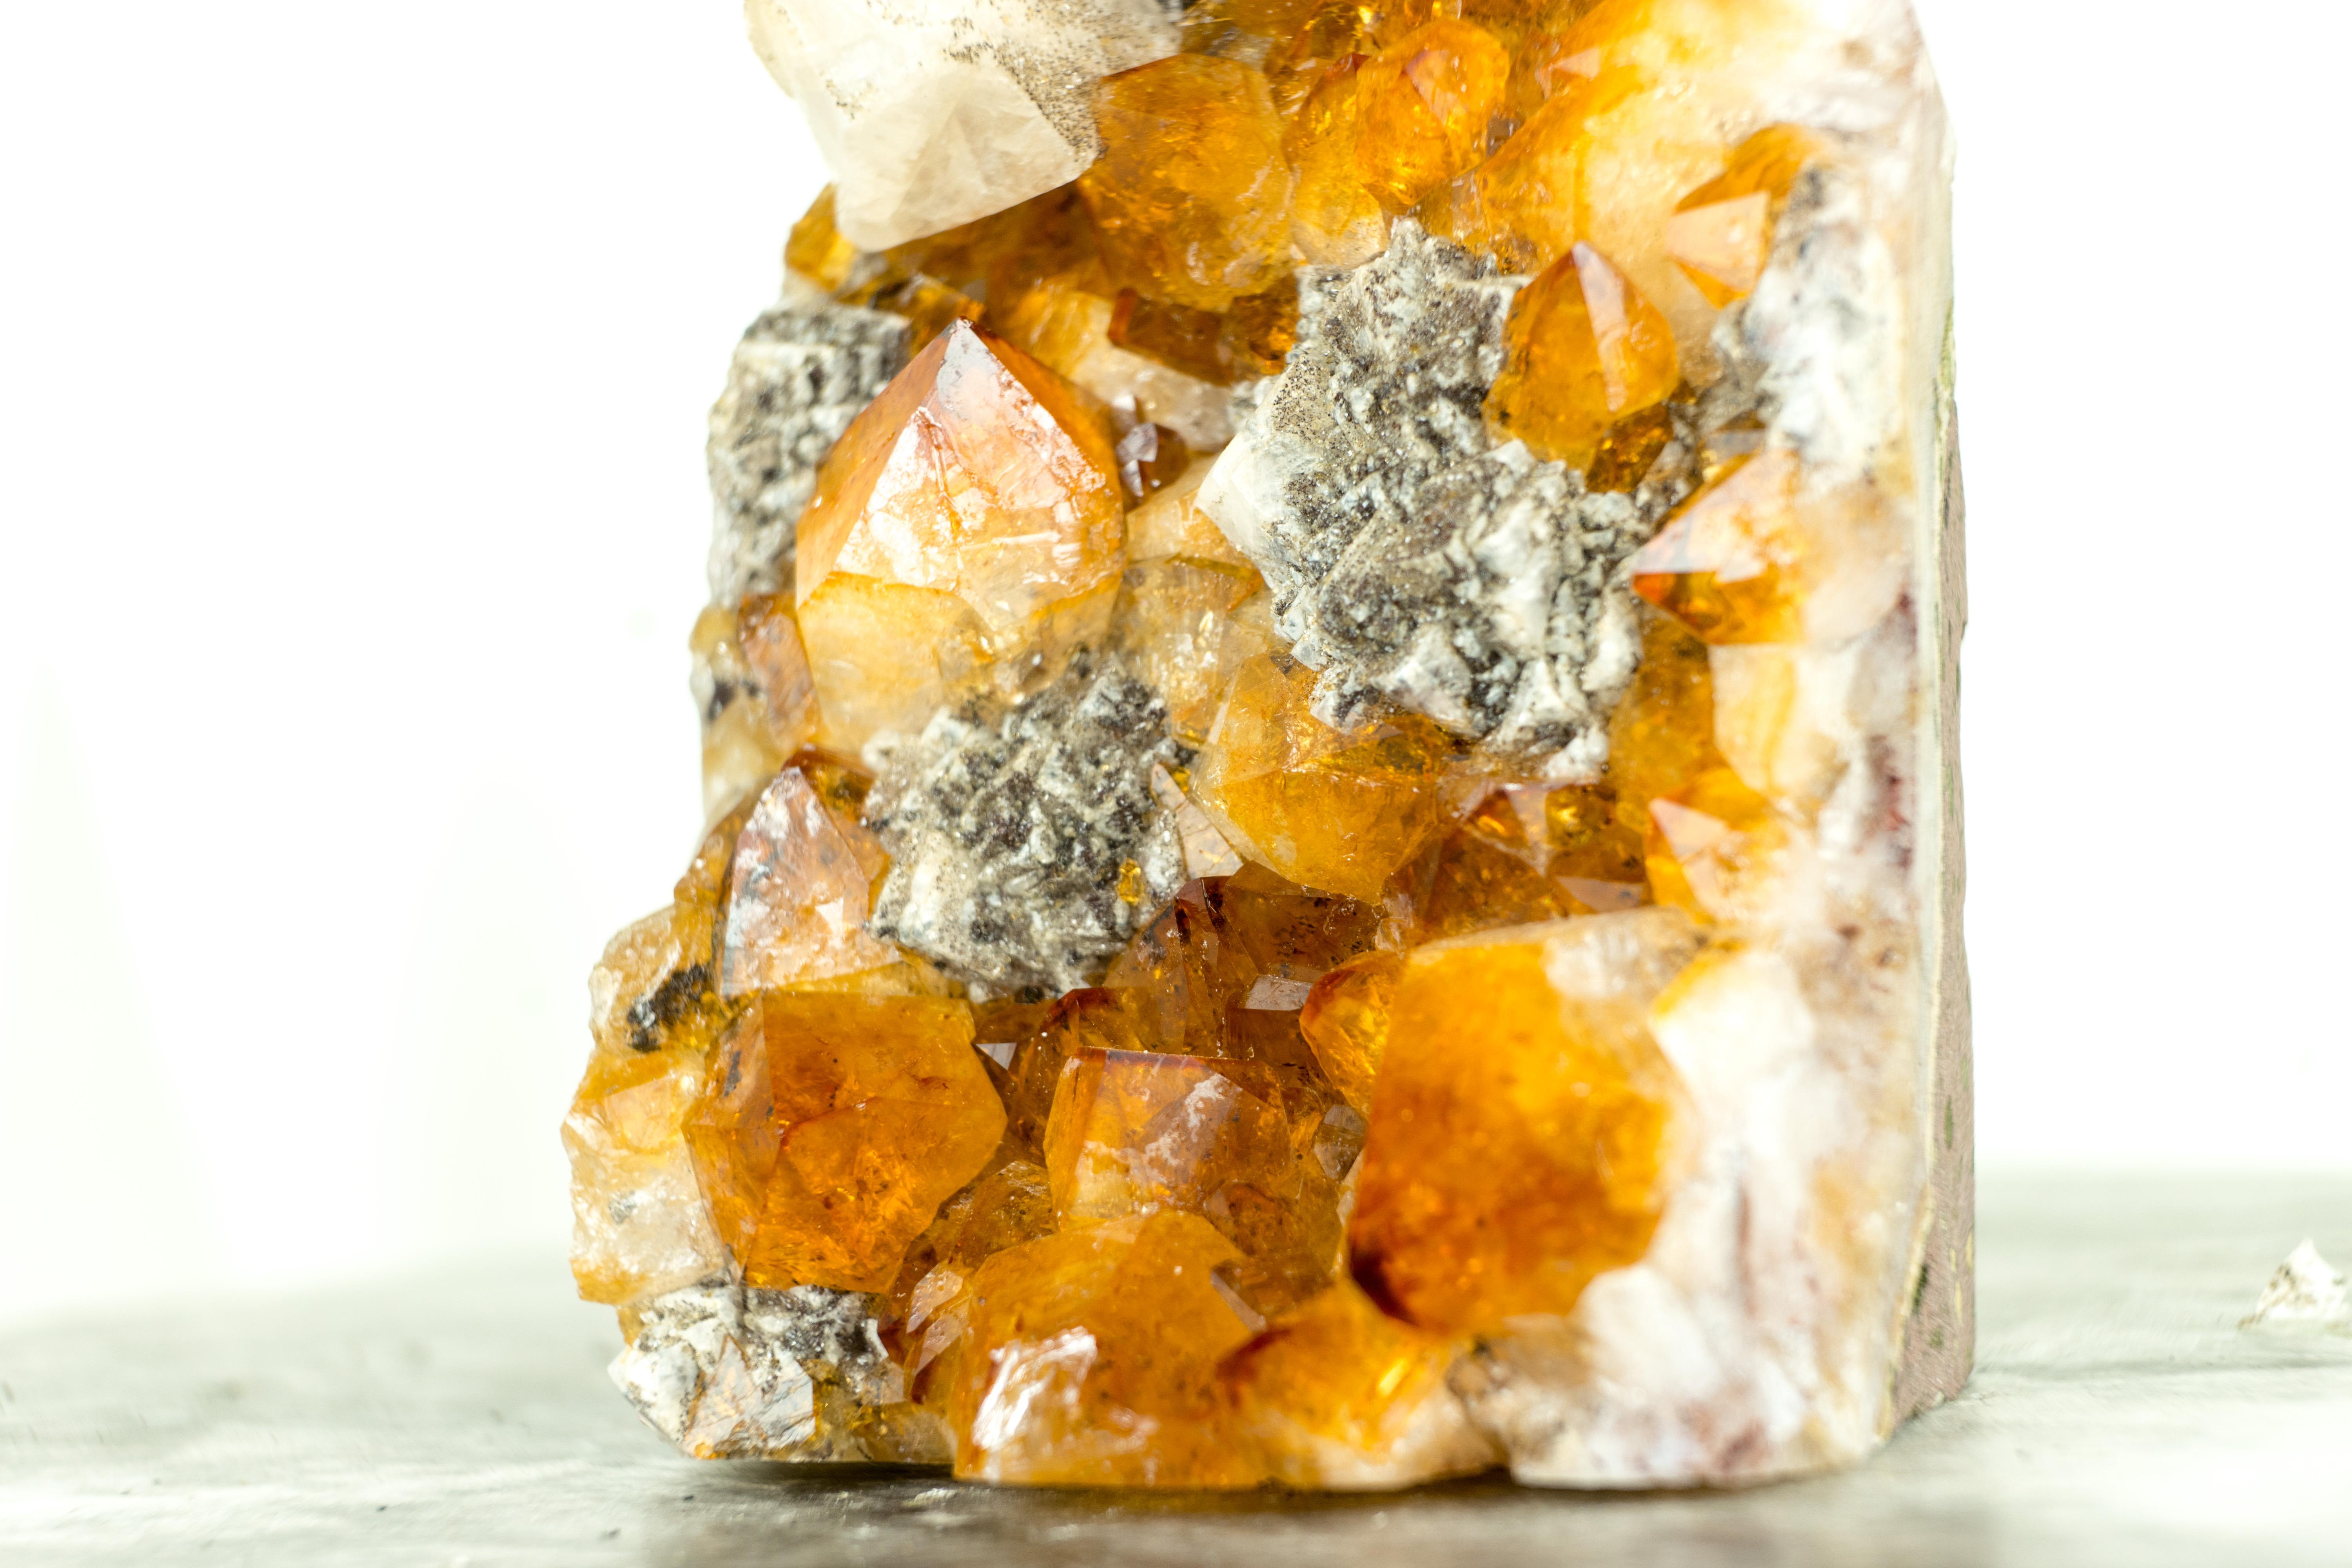 A Rare Citrine Cluster that boasts world-class citrine color tones, rare geometrical calcite inclusions, and beautiful aesthetics. This small yet gorgeous crystal promises to be a stunning addition to your office table, home decor, or crystal